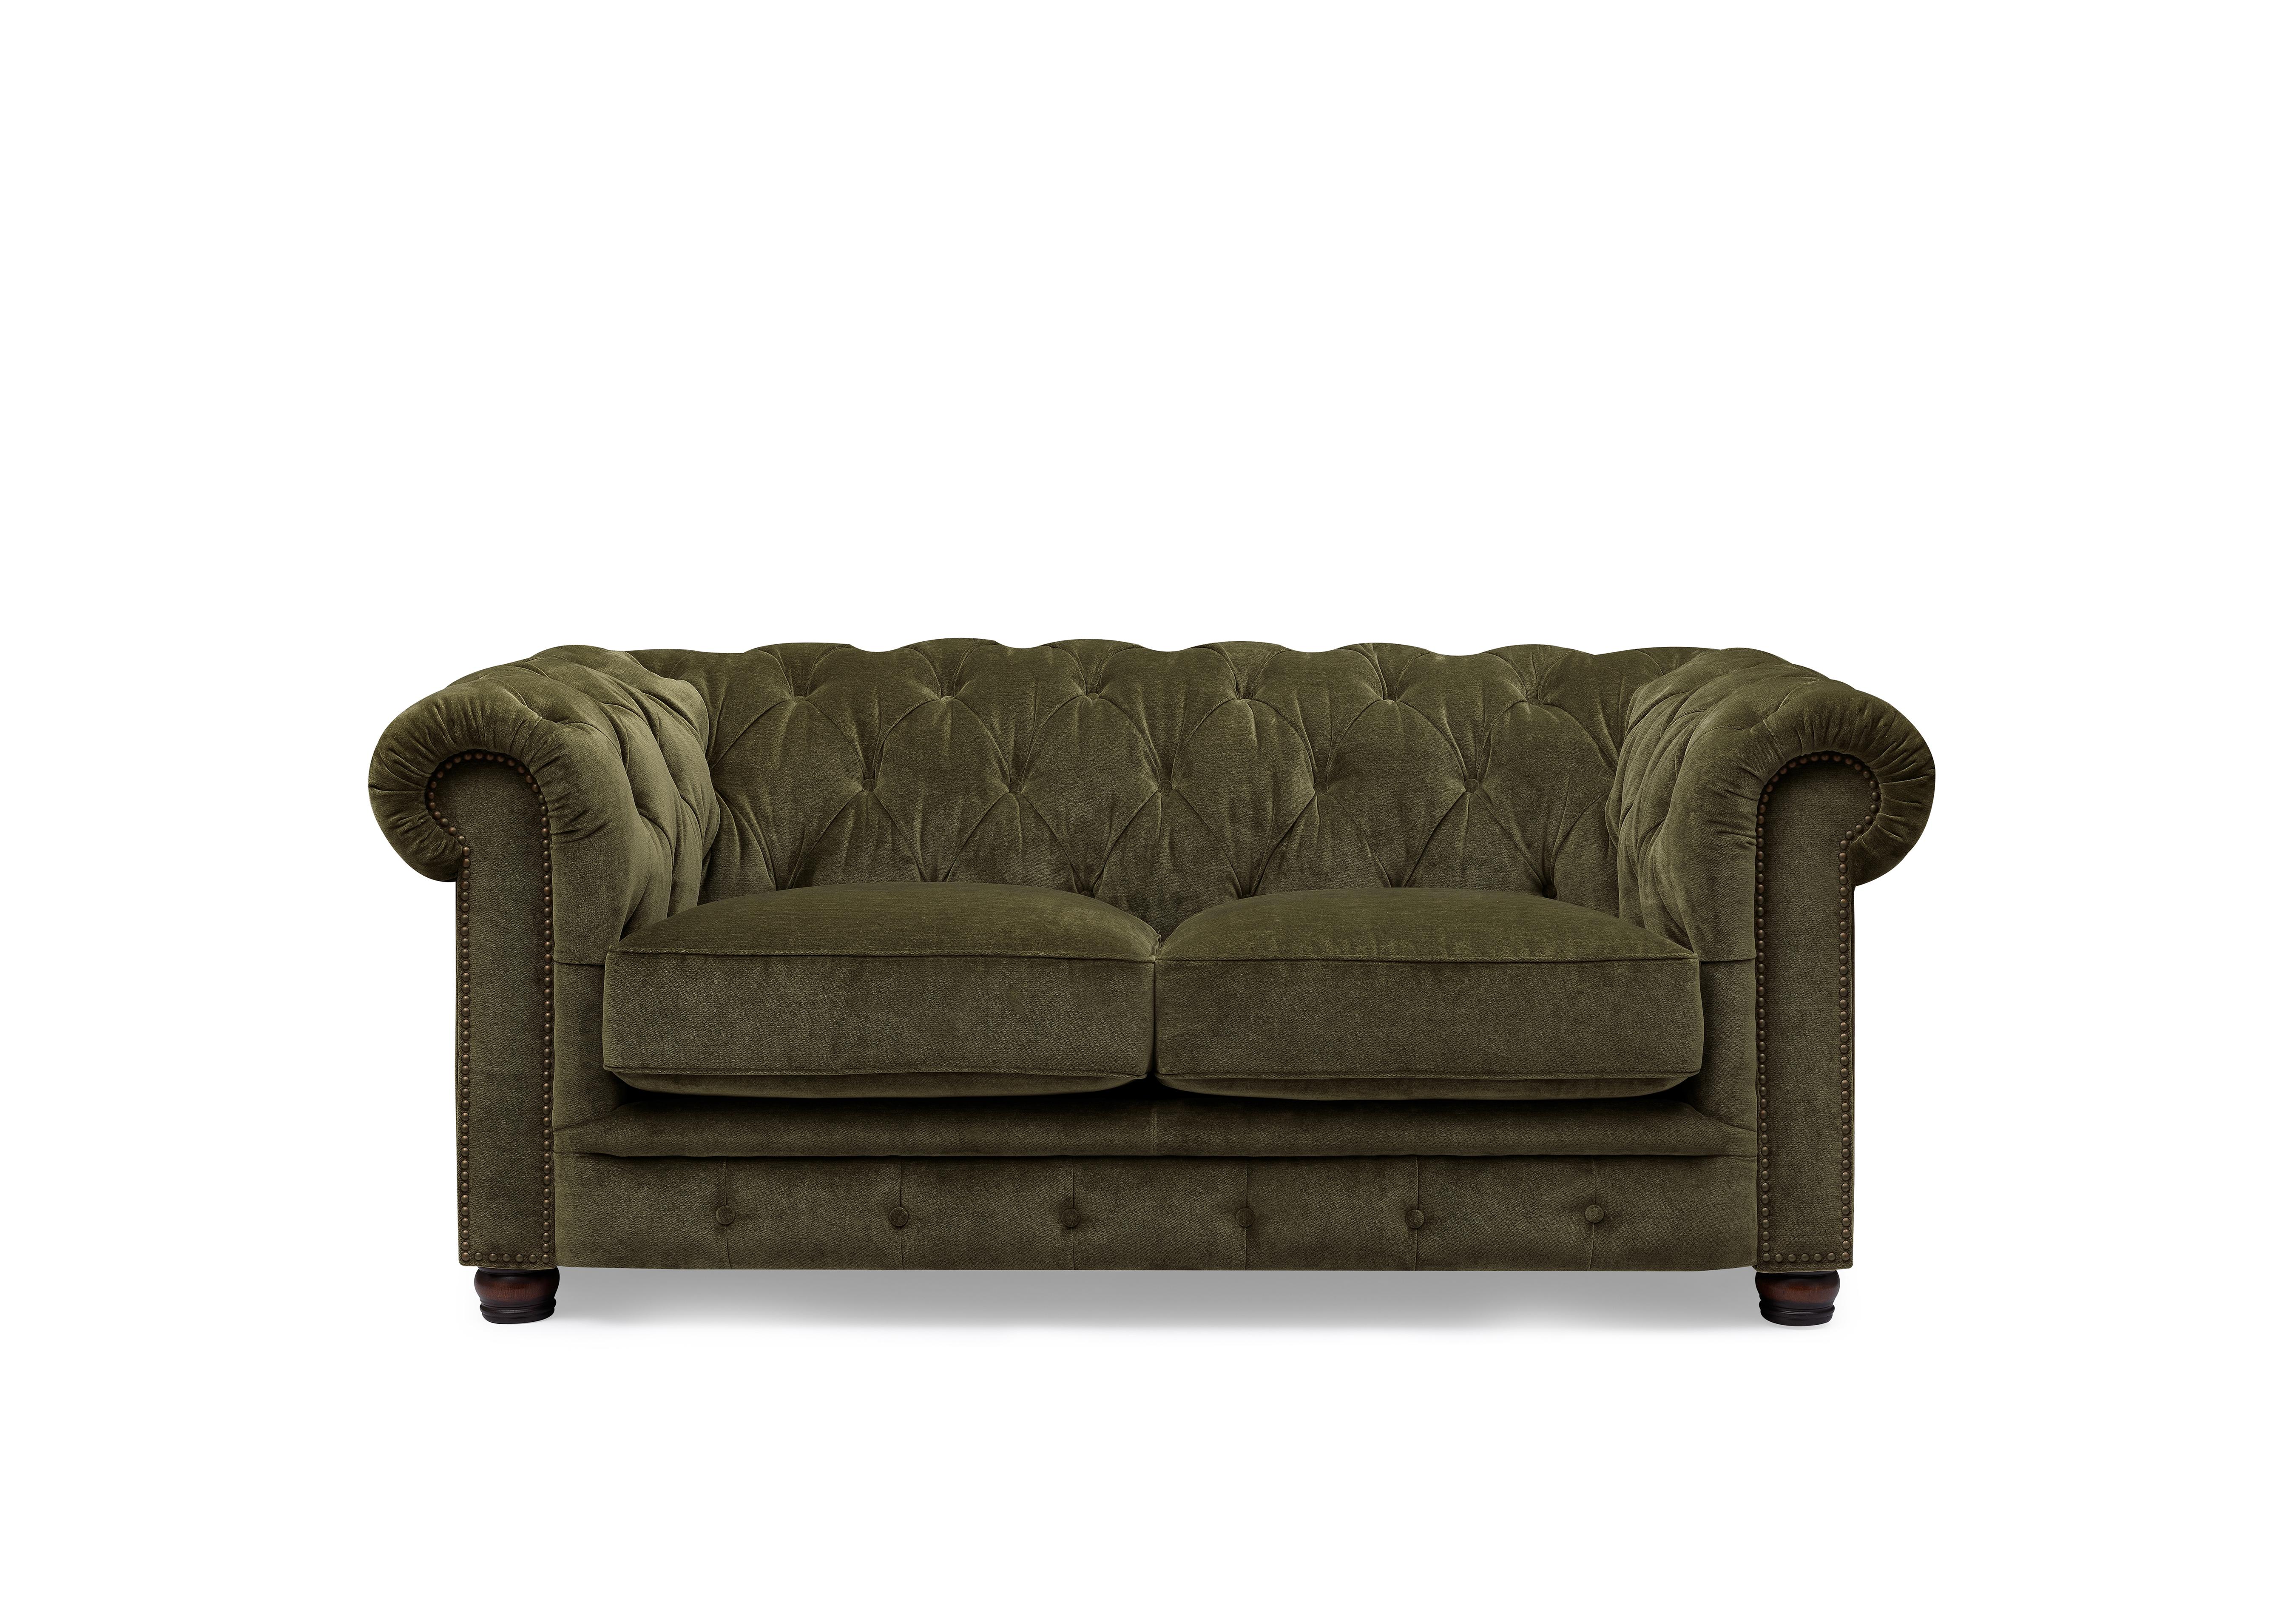 Shackleton 2 Seater Fabric Chesterfield Sofa in X3y1-W018 Pine on Furniture Village